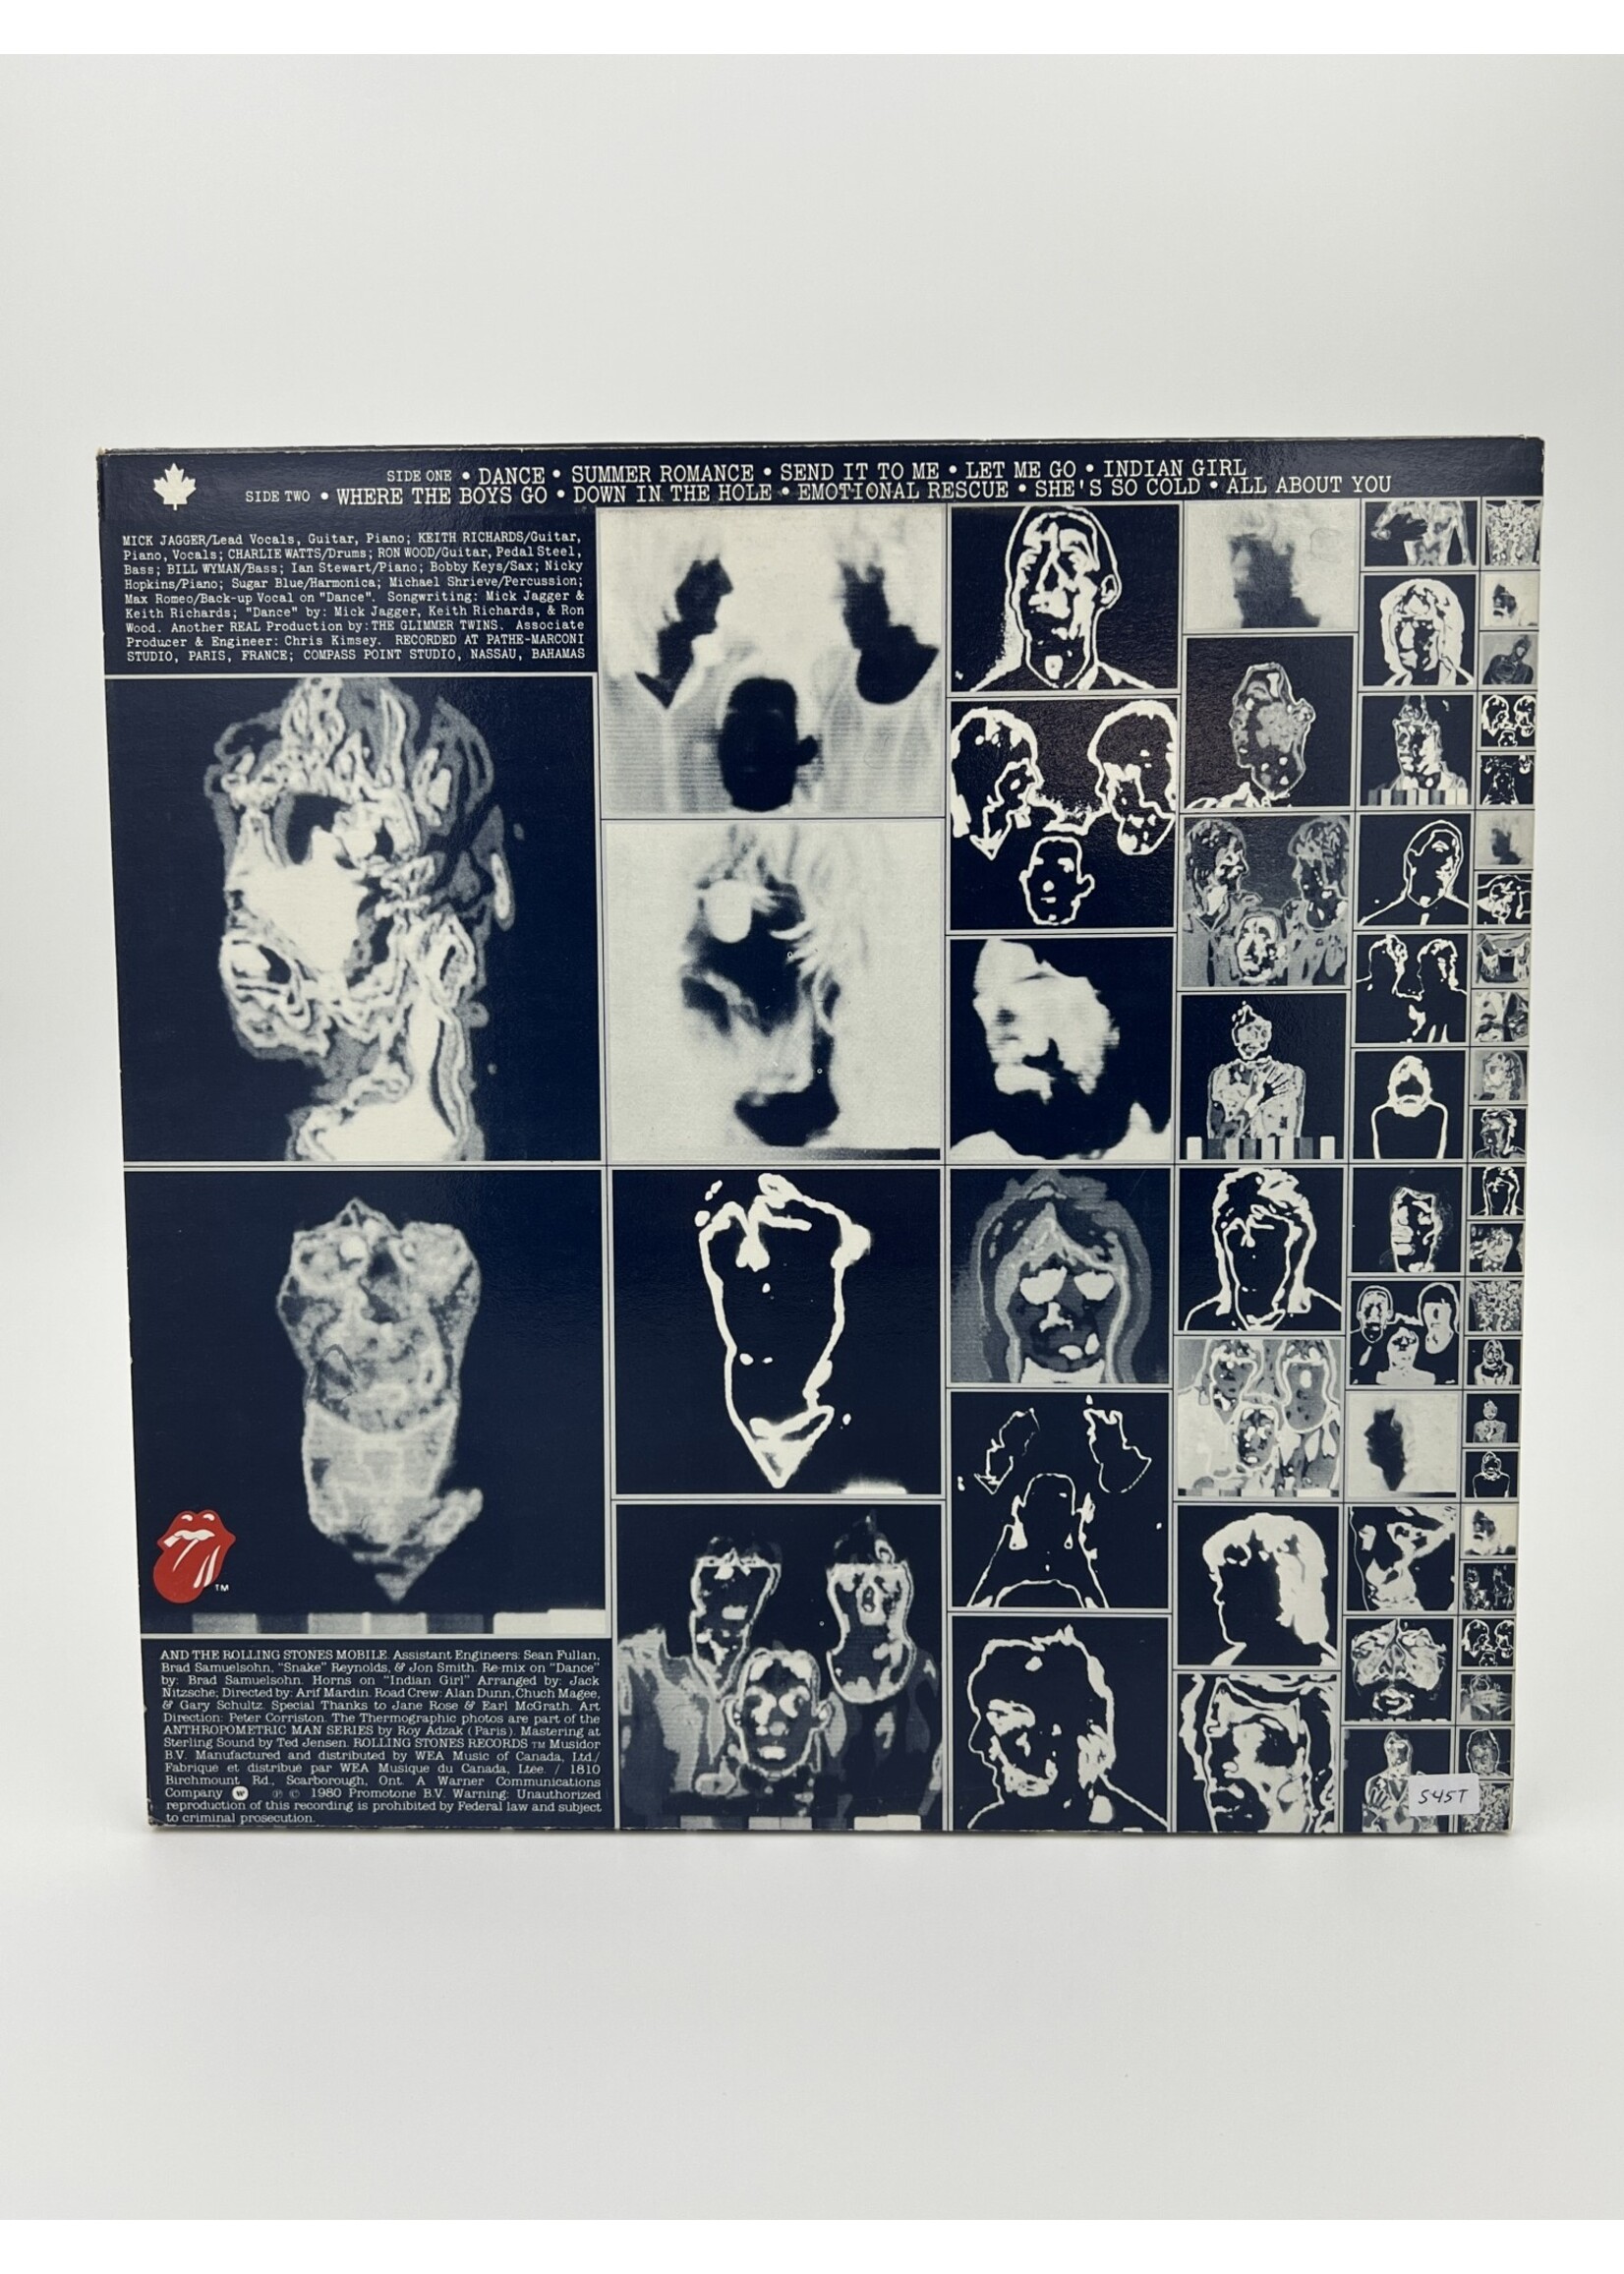 LP The Rolling Stones Emotional Rescue LP Record With Poster